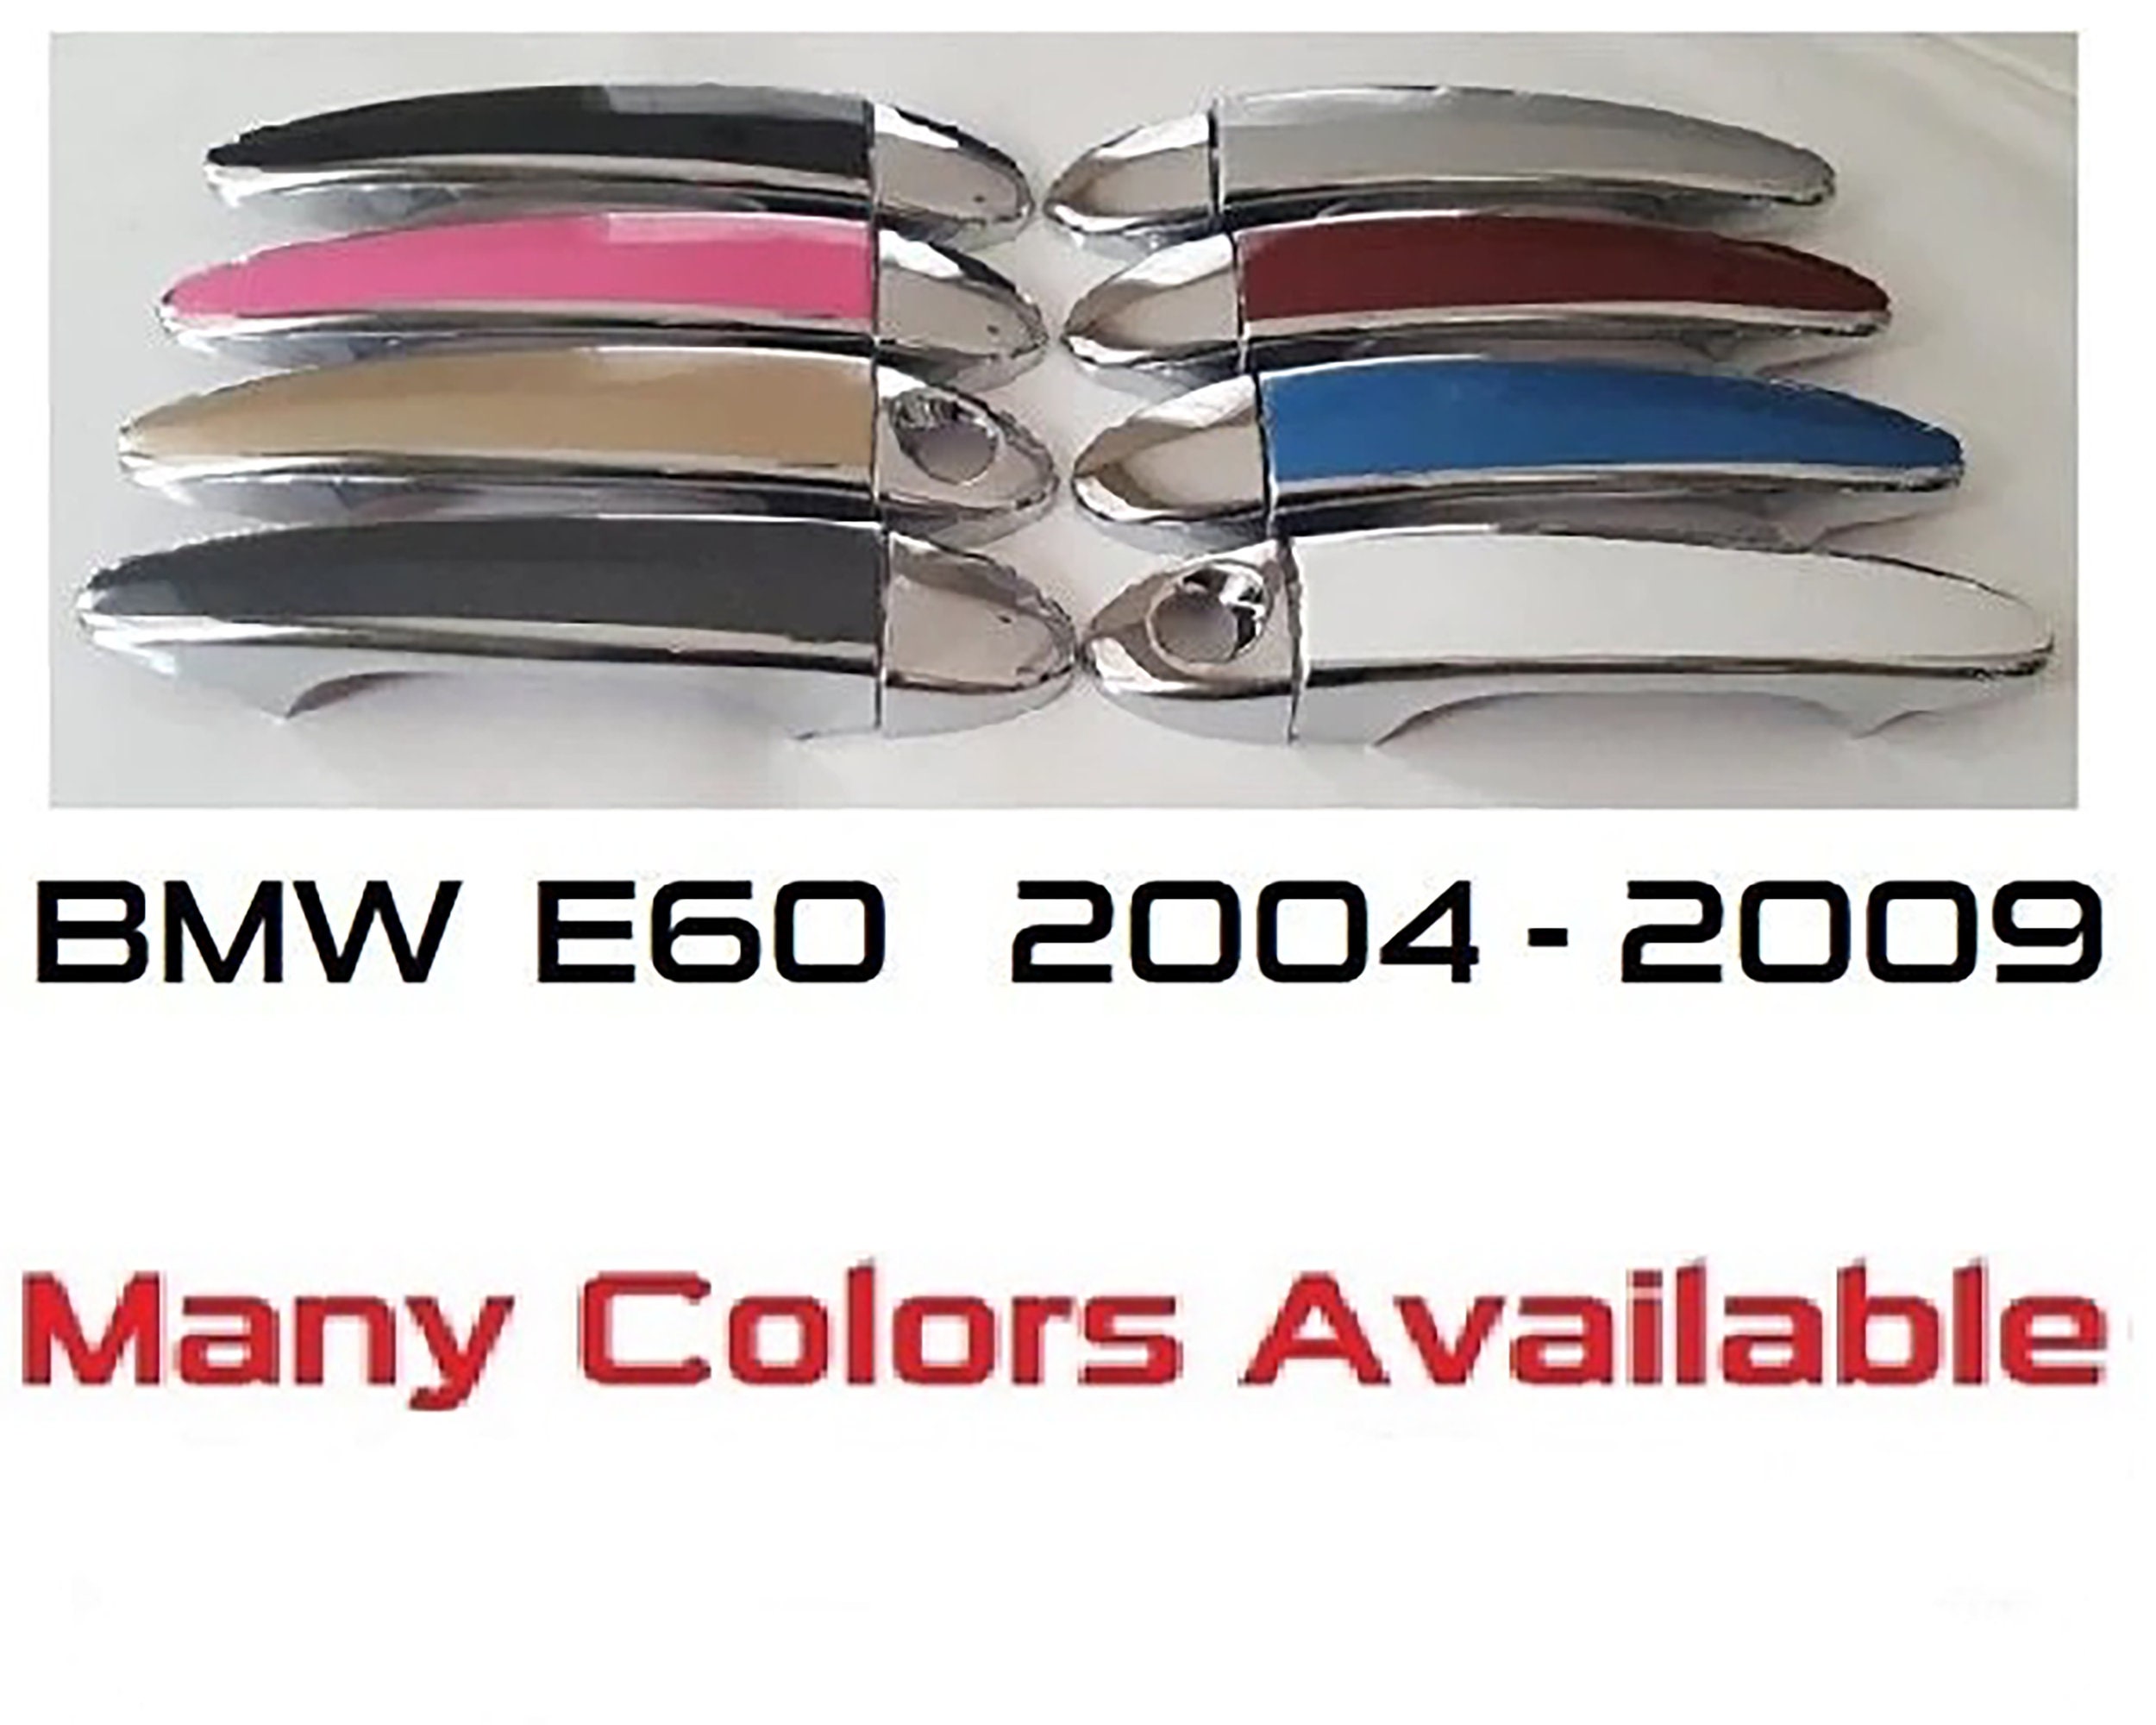 Full Set of Custom Chrome Door Handle Overlays / Covers For the